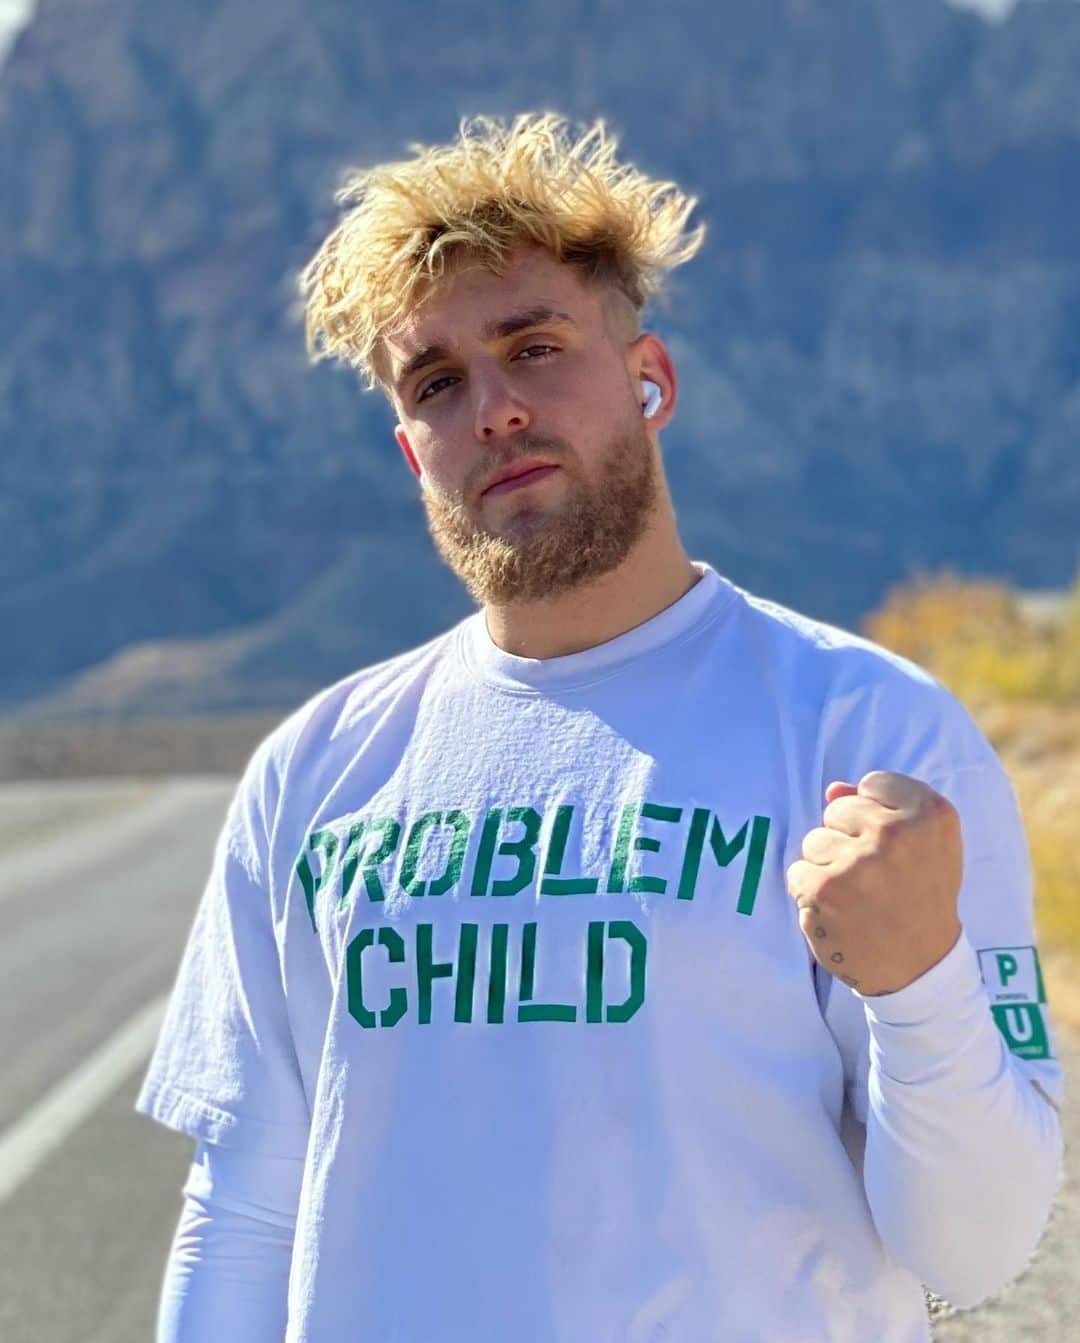 Jake Paul - Biography, Profile, Facts, and Career